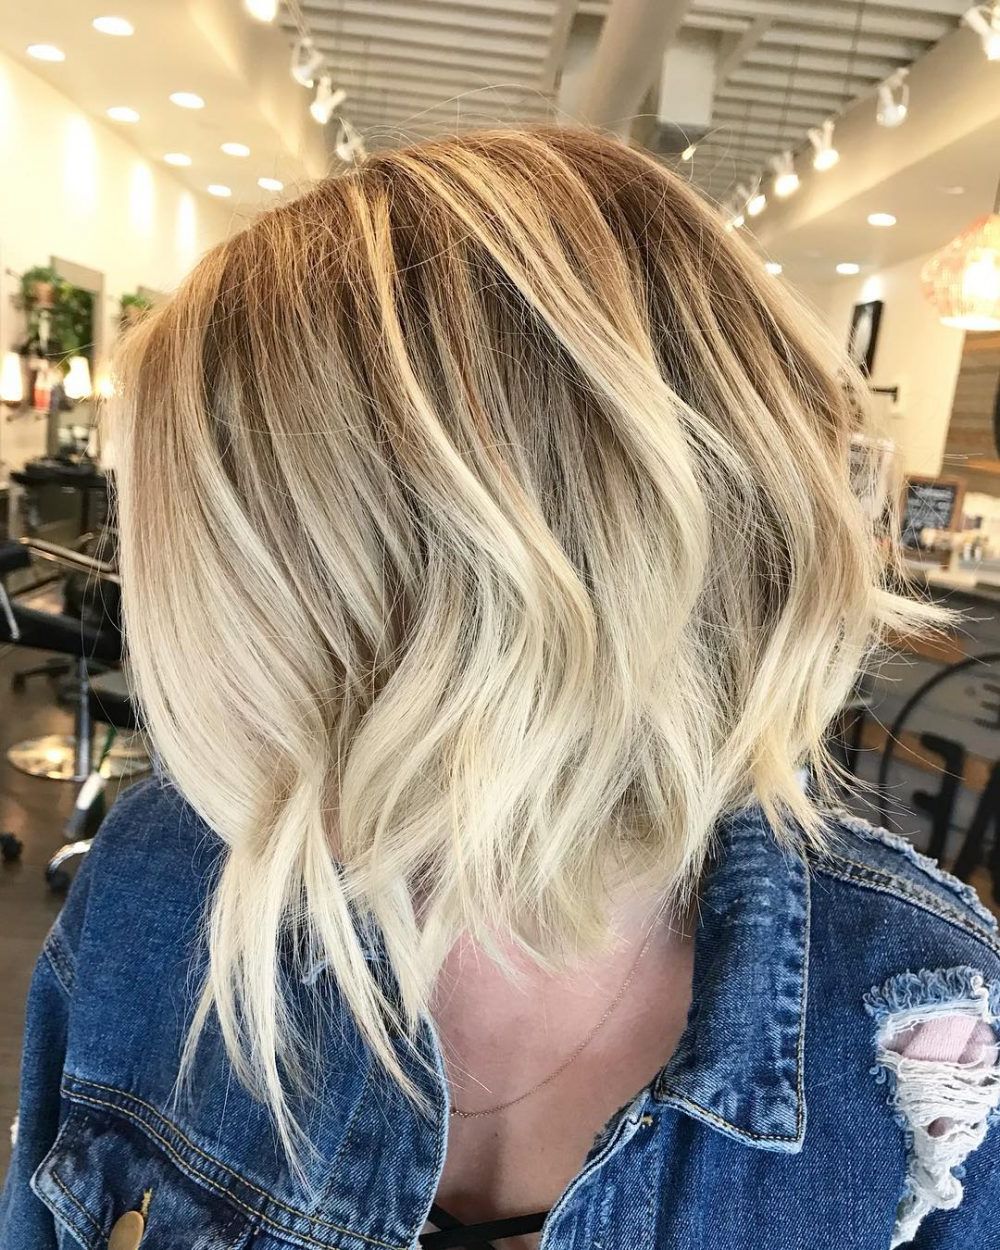 34 Best Choppy Layered Hairstyles (that Will Flatter Anyone) With Regard To Most Up To Date Two Layer Razored Blonde Hairstyles (View 6 of 20)